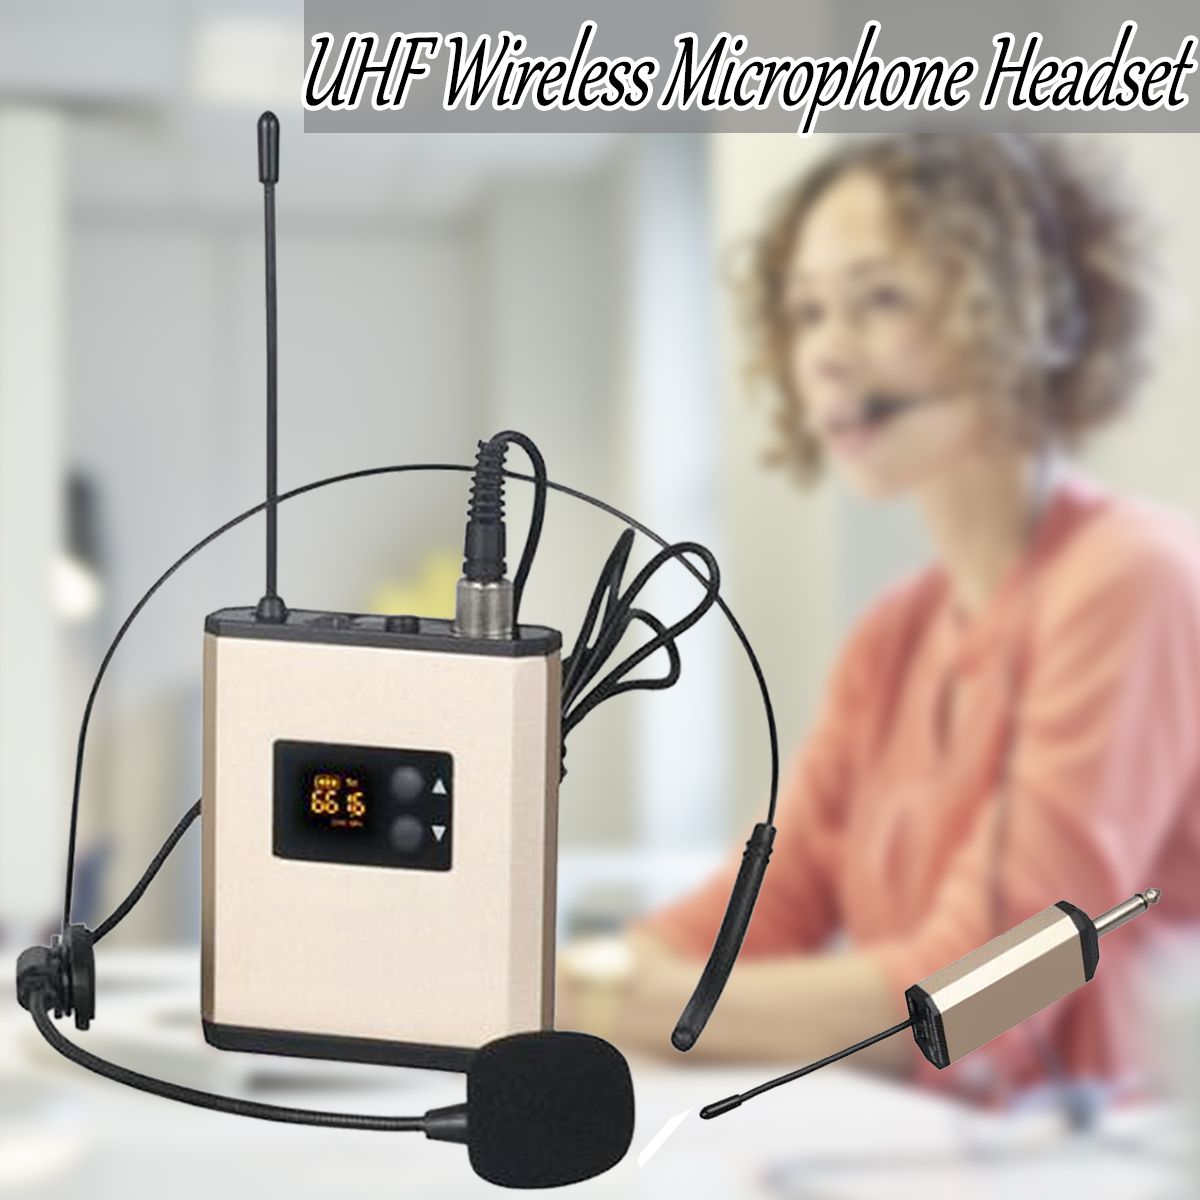 UHF-40-Channel-Wireless-Microphone-Headset-Mic-for-KTV-Stage-Conference-Teaching-1517986